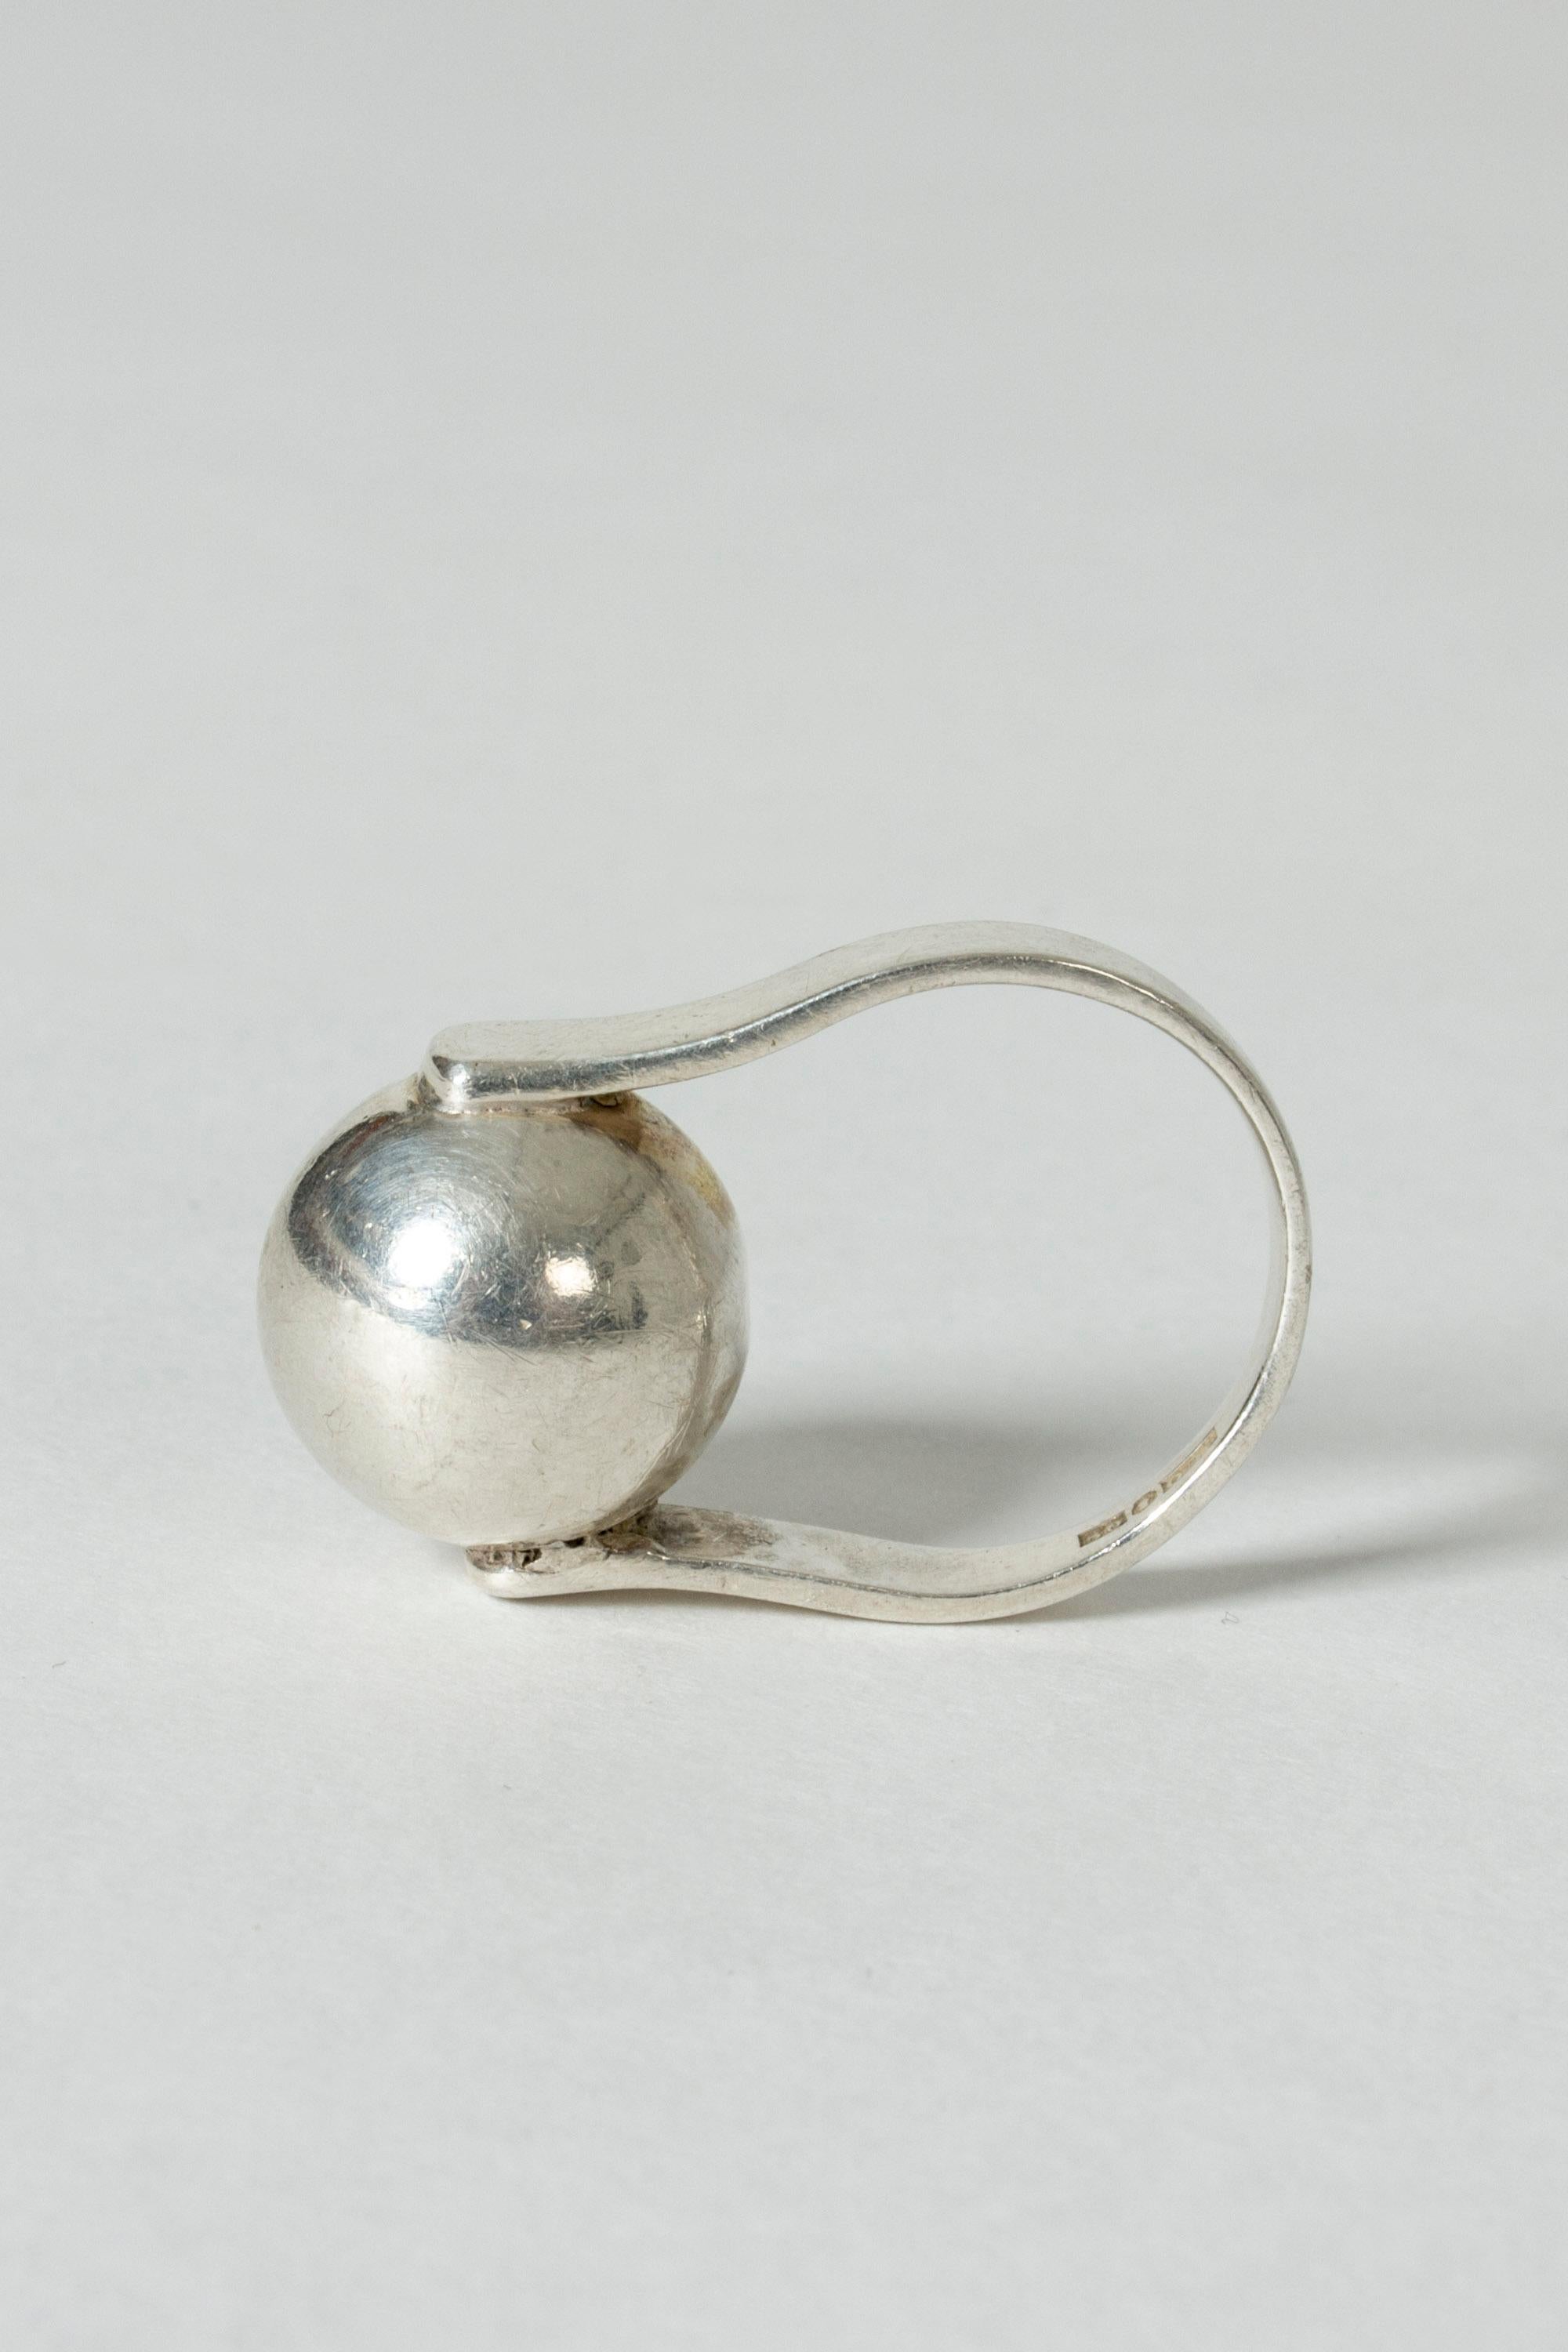 Silver ring by Isaac Cohen with a large silver sphere, elegantly held up by the silver band.